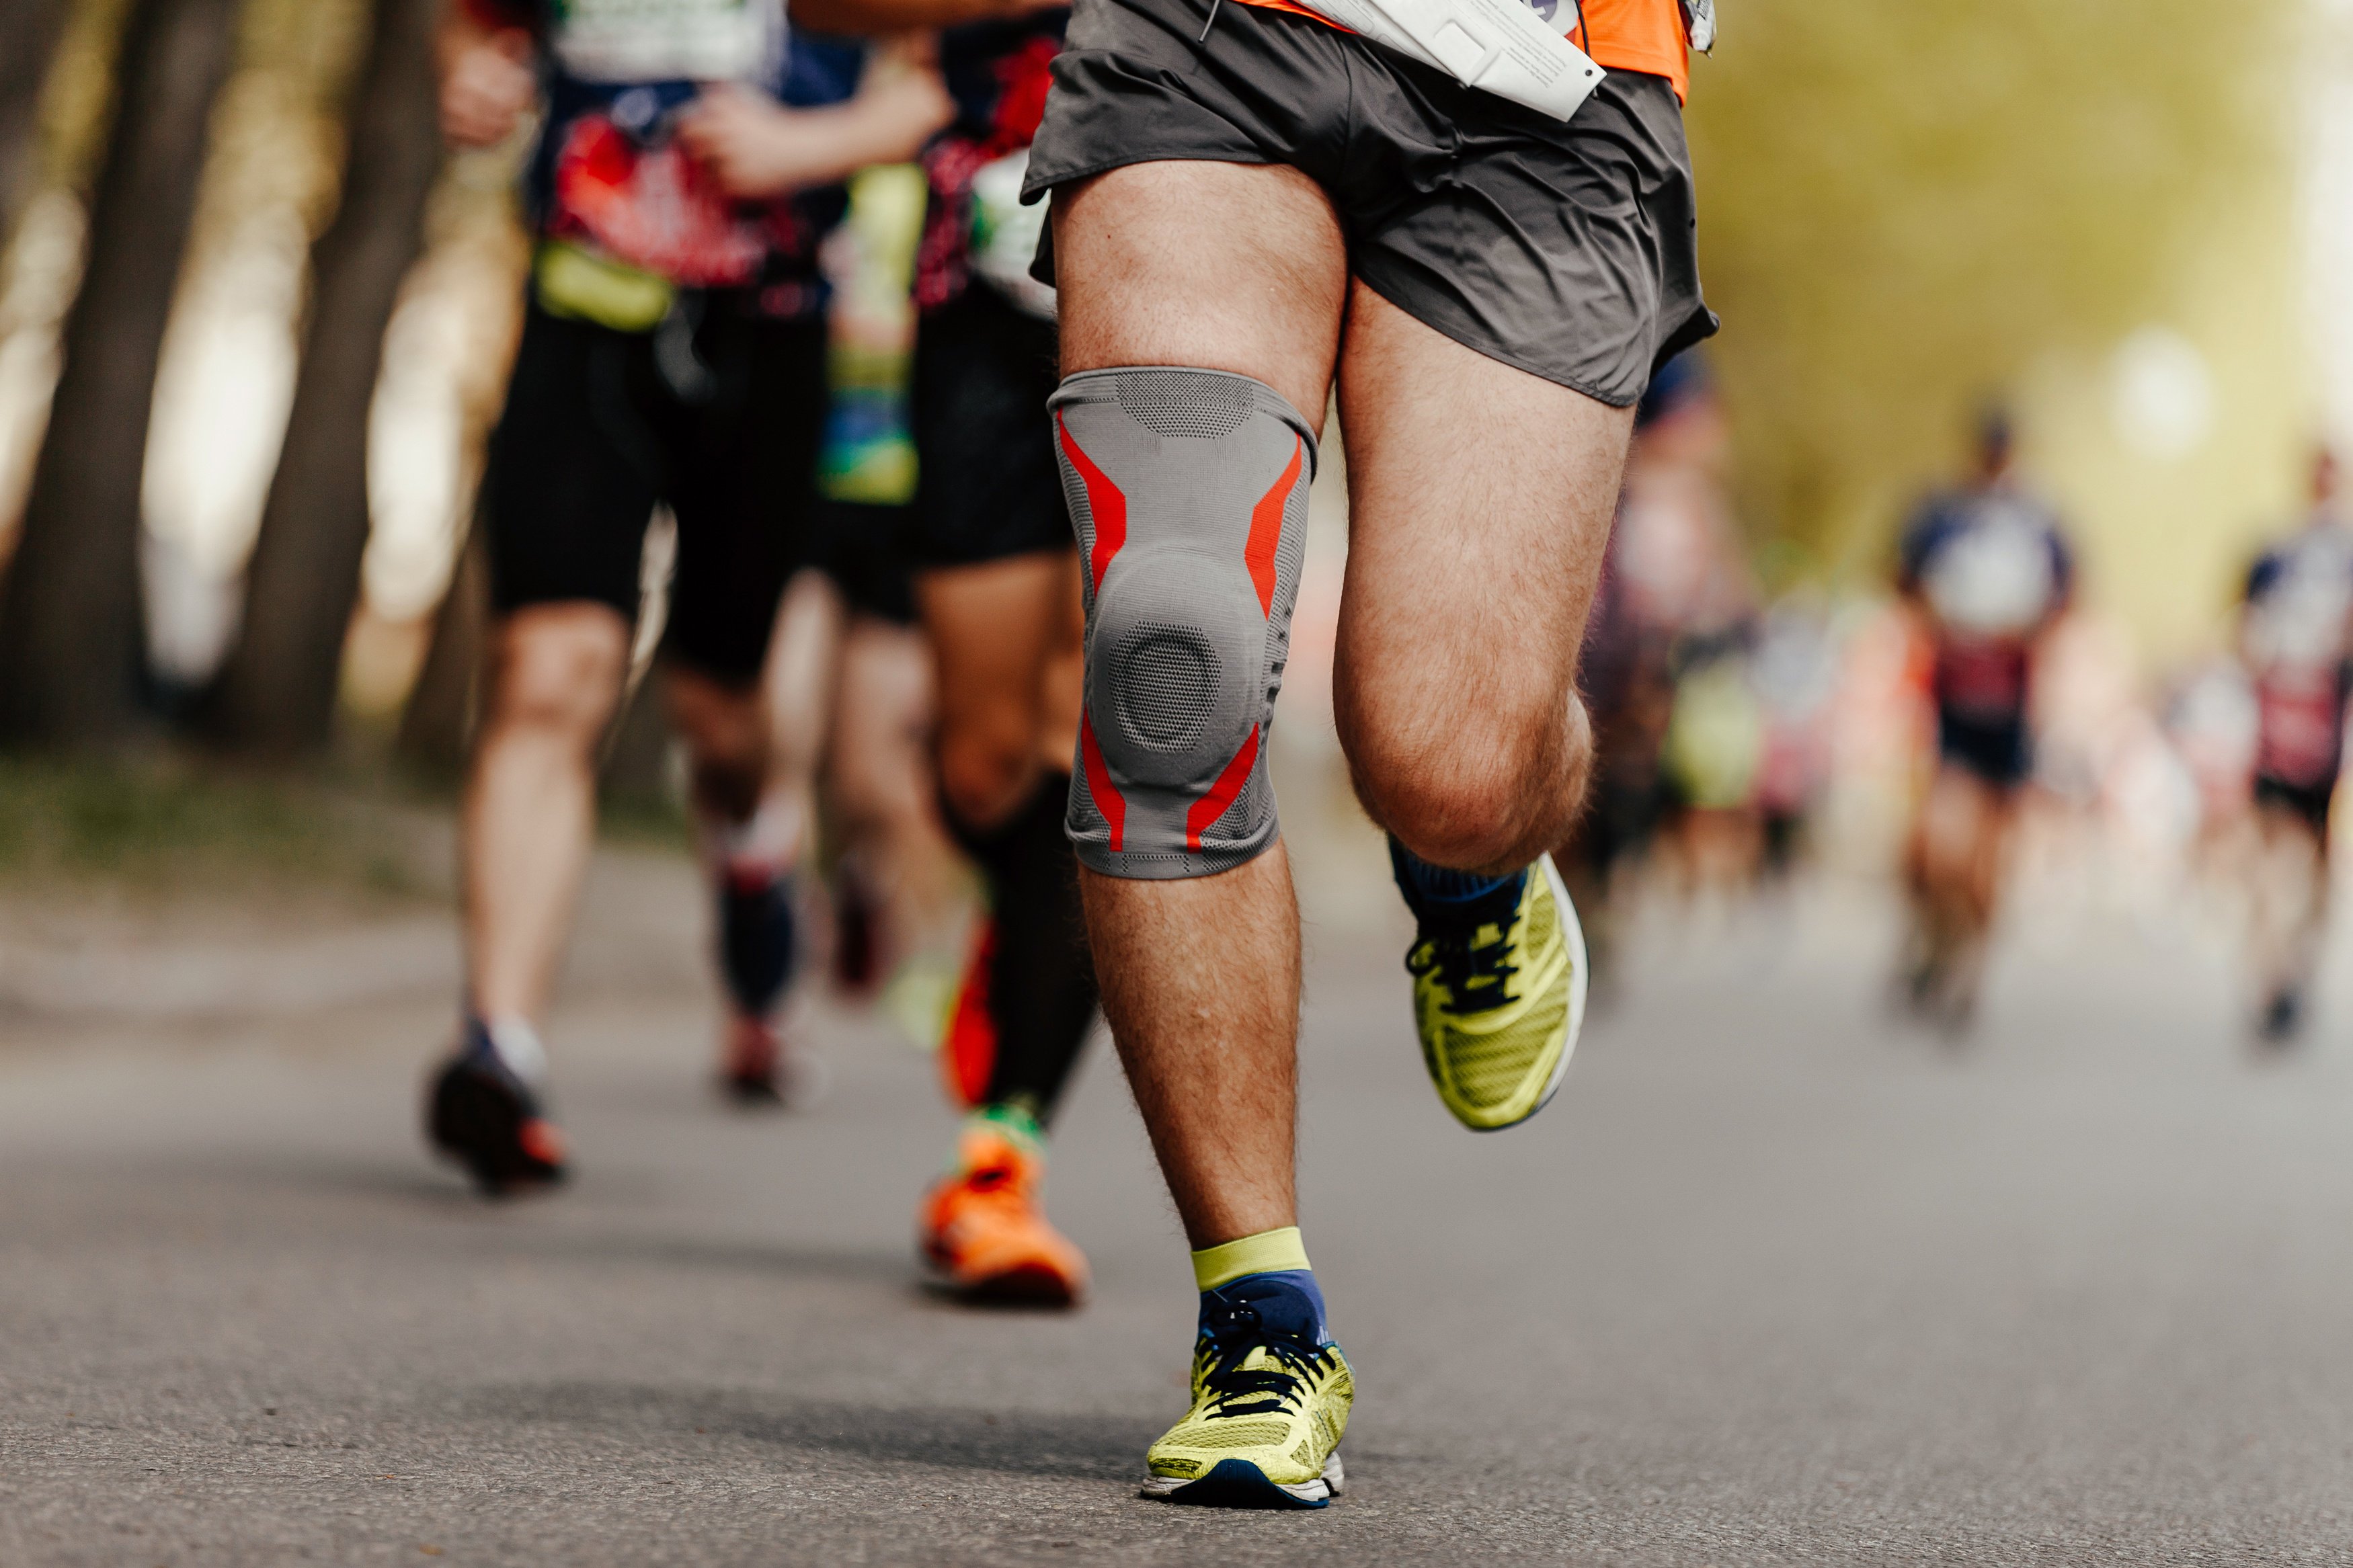 The knee is prone to stress and injury, but regular running keeps the joint lubricated and builds up cartilage, lowering the risk of arthritis. Avoiding high-impact sports and working on your quad strength will help keep knees pain-free, doctors say. Photo: Shutterstock